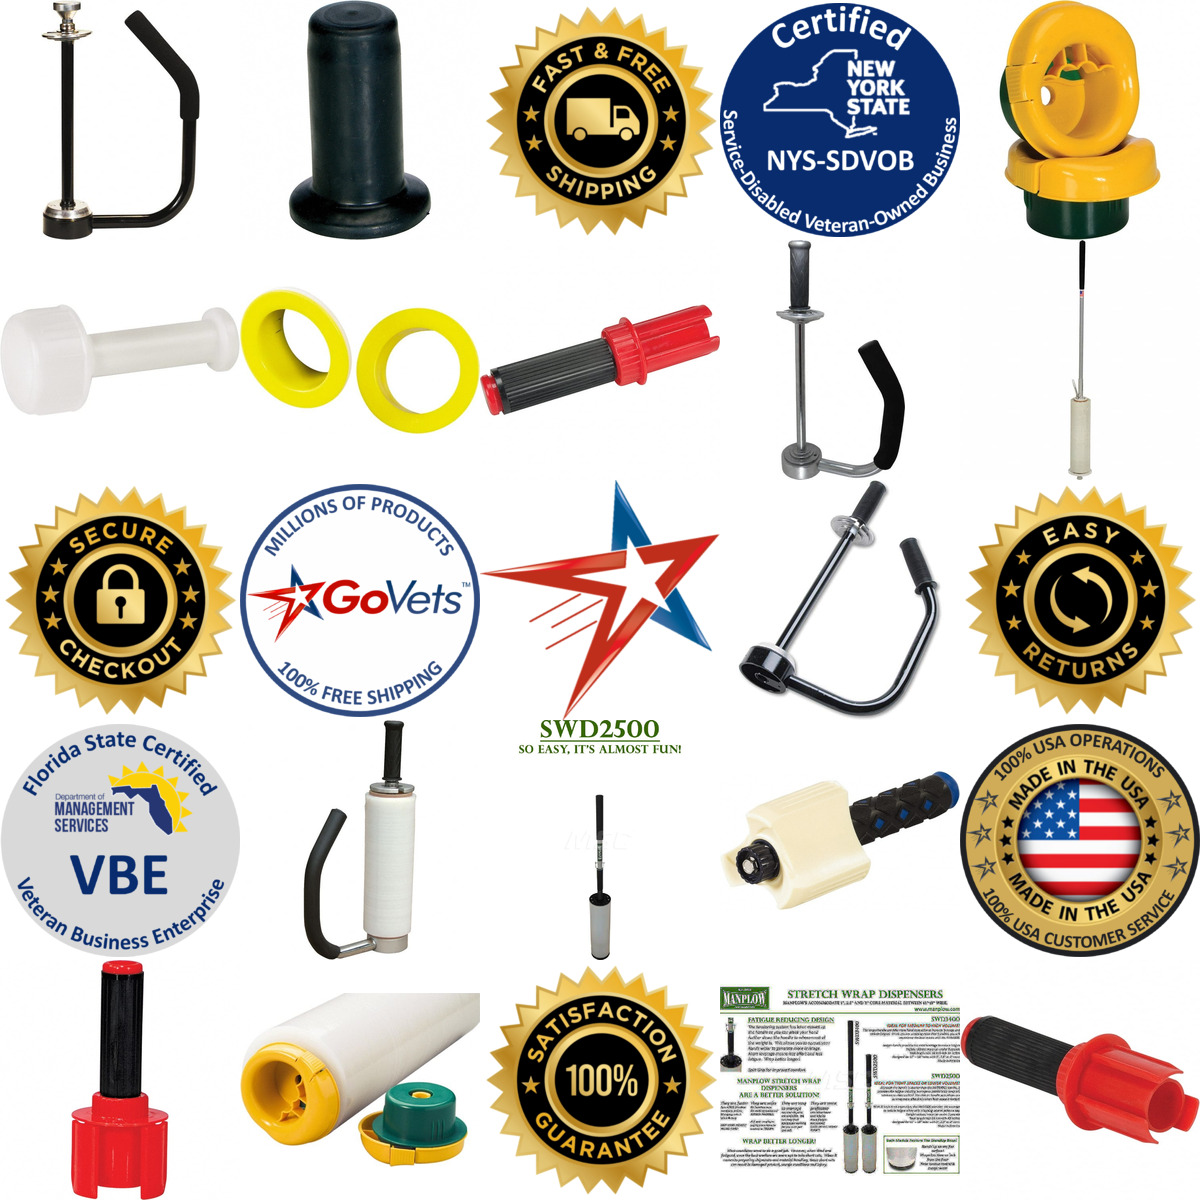 A selection of Hand Held Stretch Wrap Dispensers products on GoVets